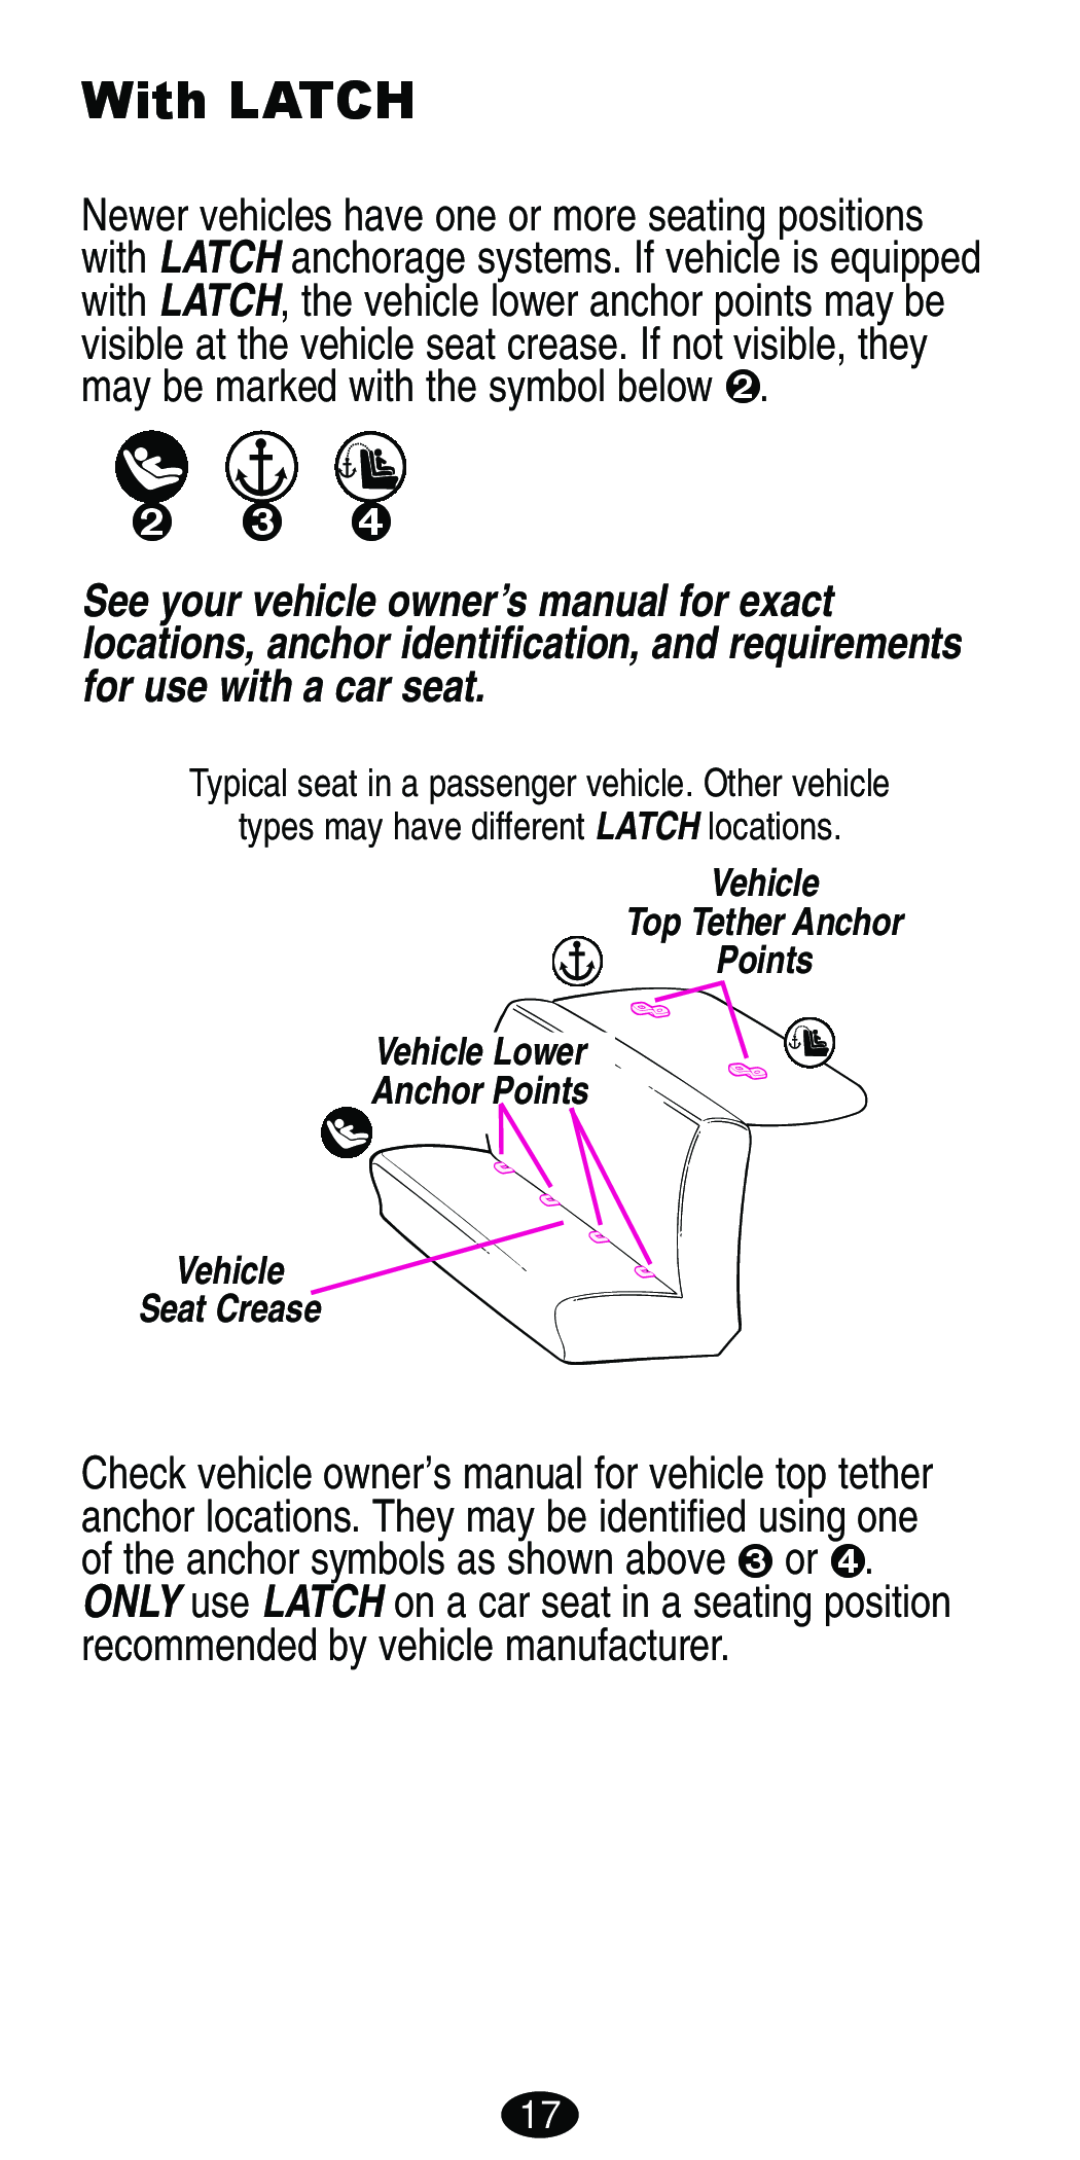 Graco Car Seat/Booster manual With LATCH, š › œ, Typical seat in a passenger vehicle. Other vehicle, Seat Crease 